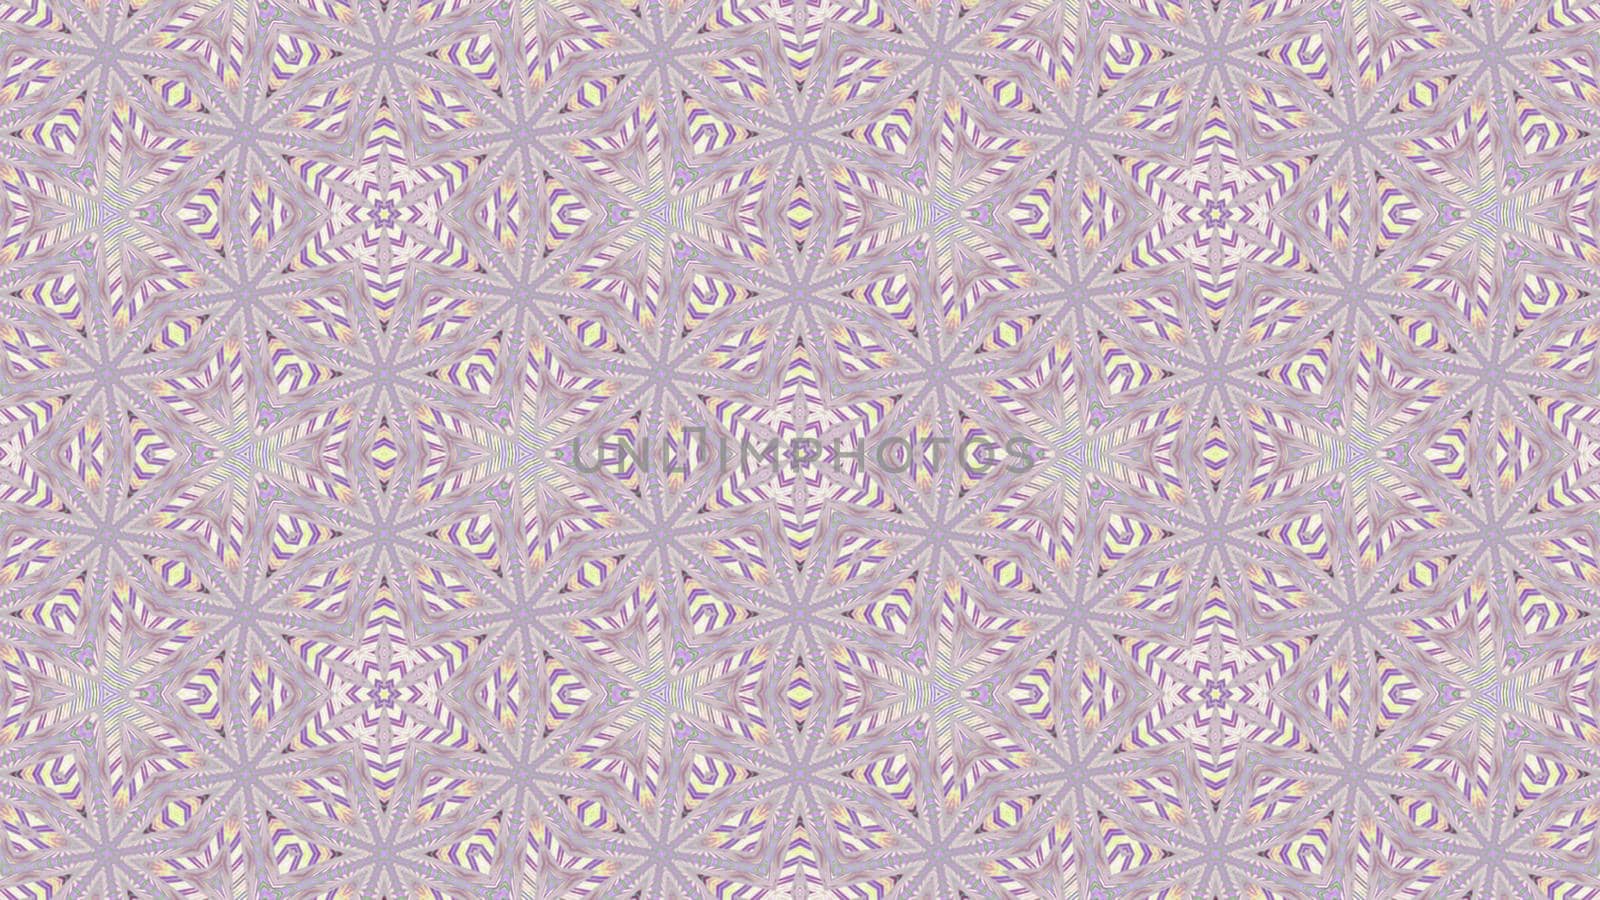 Abstract kaleidoscope background with a symmetrical pattern.